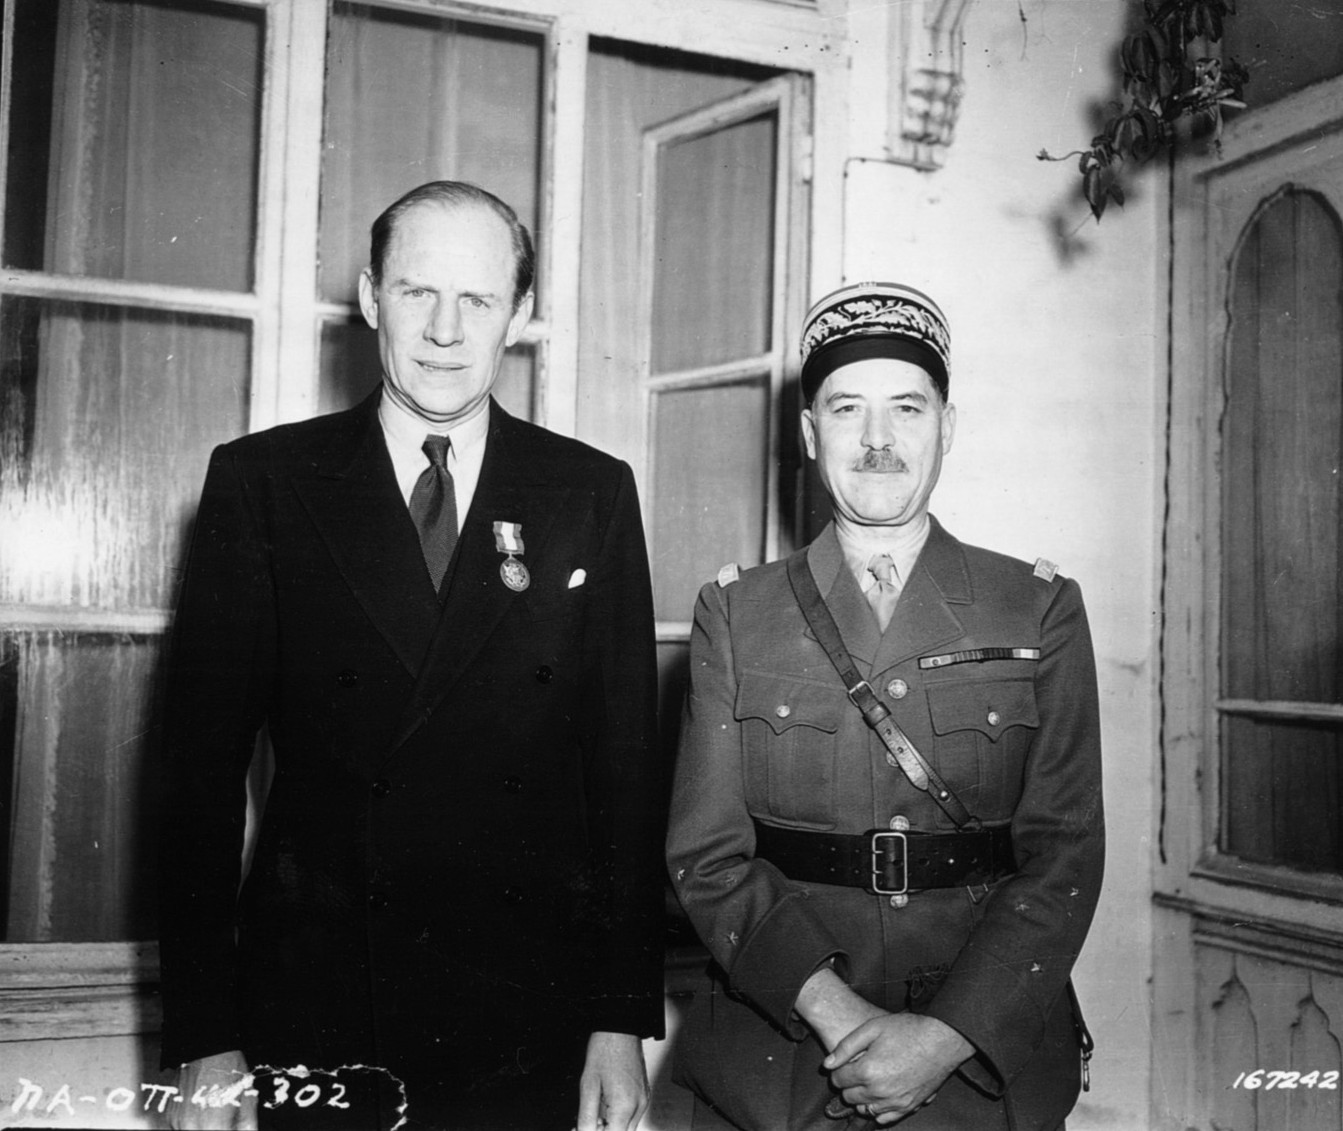 Robert Murphy, American minister to French North Africa, recruited French Army officers to aid the Allied cause. He is pictured with General Alphonse Juin, appointed commander of French forces in North Africa by the Vichy government. He changed sides after the Allied invasion.